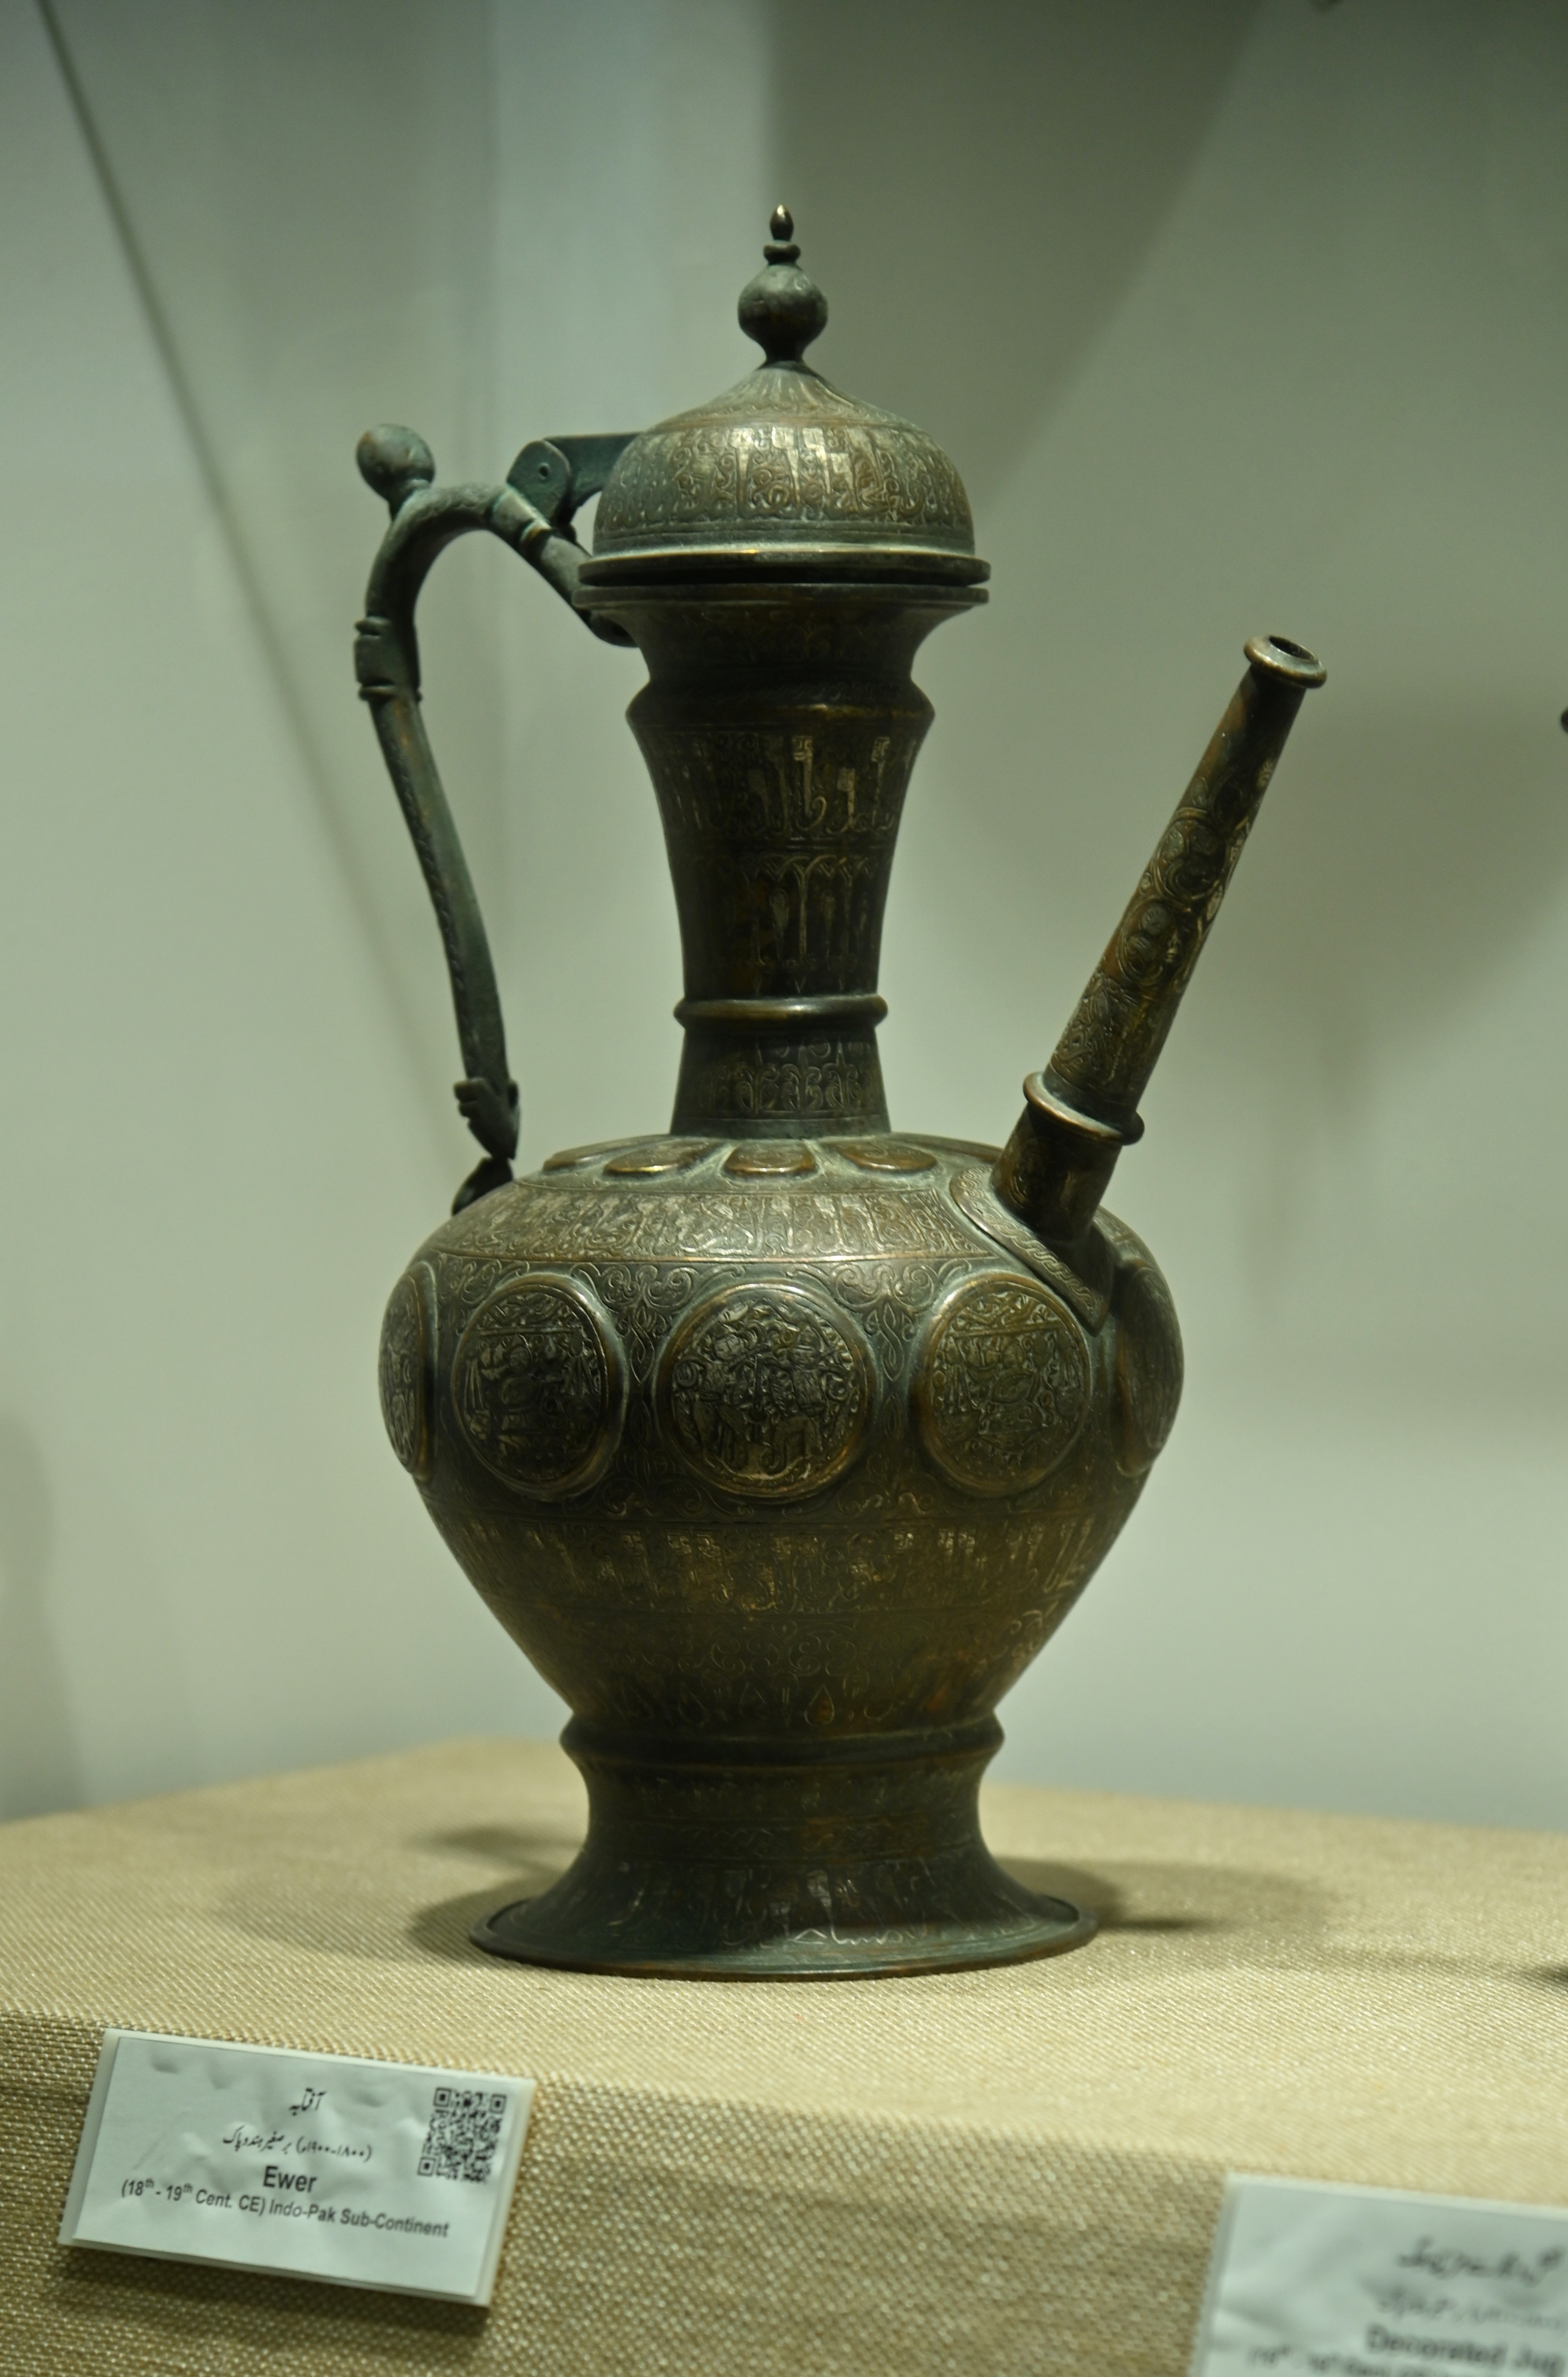 The decorated Ewer